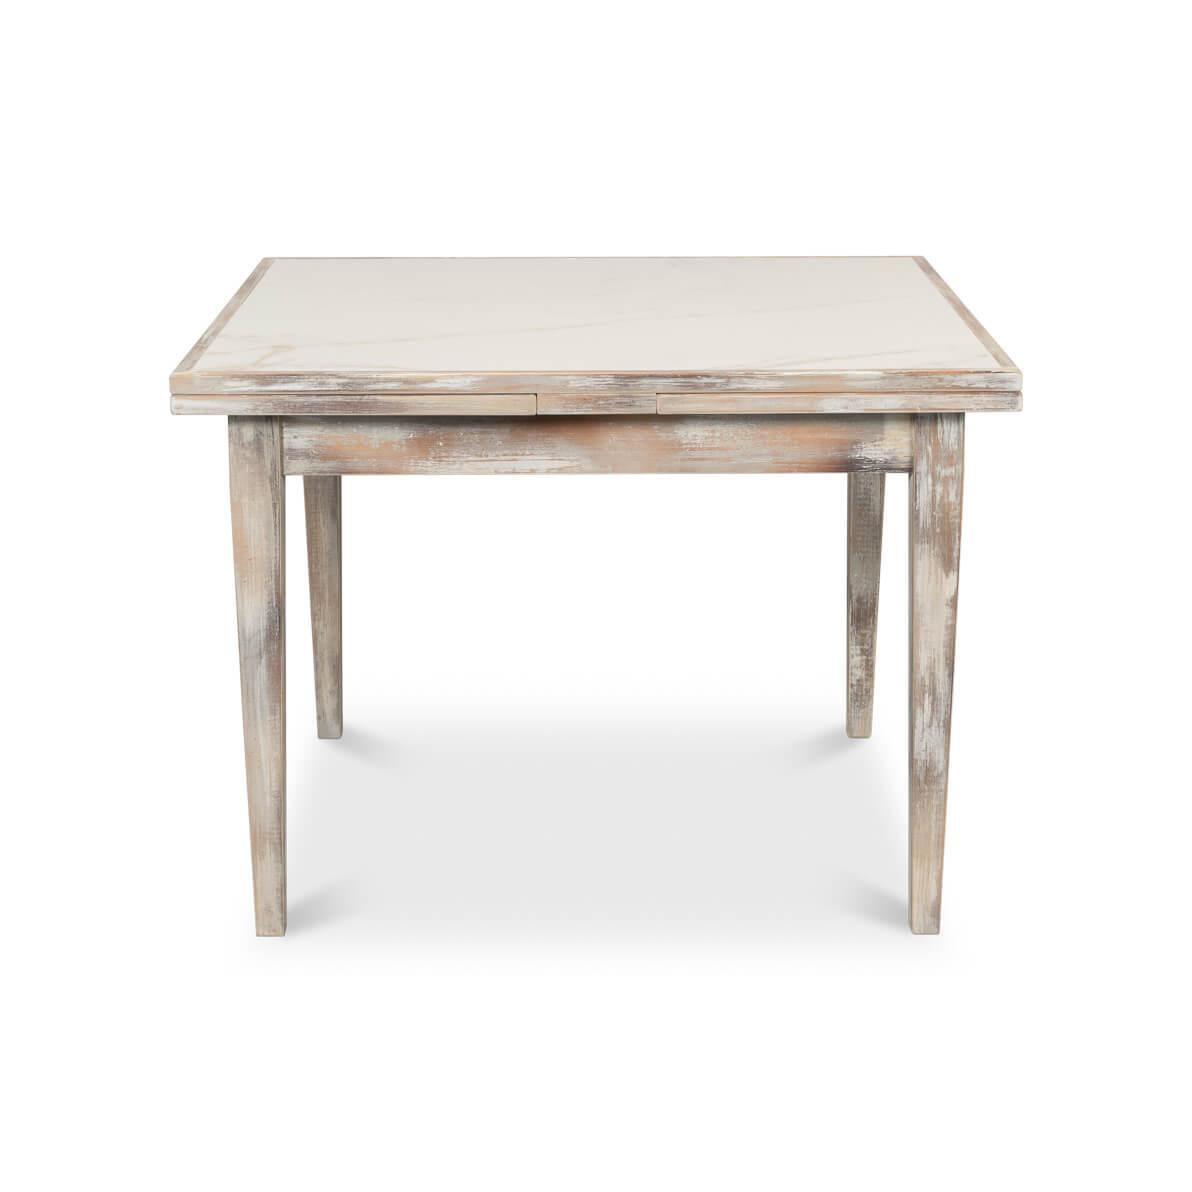 An Italian-style draw leaf table converts from a square 41